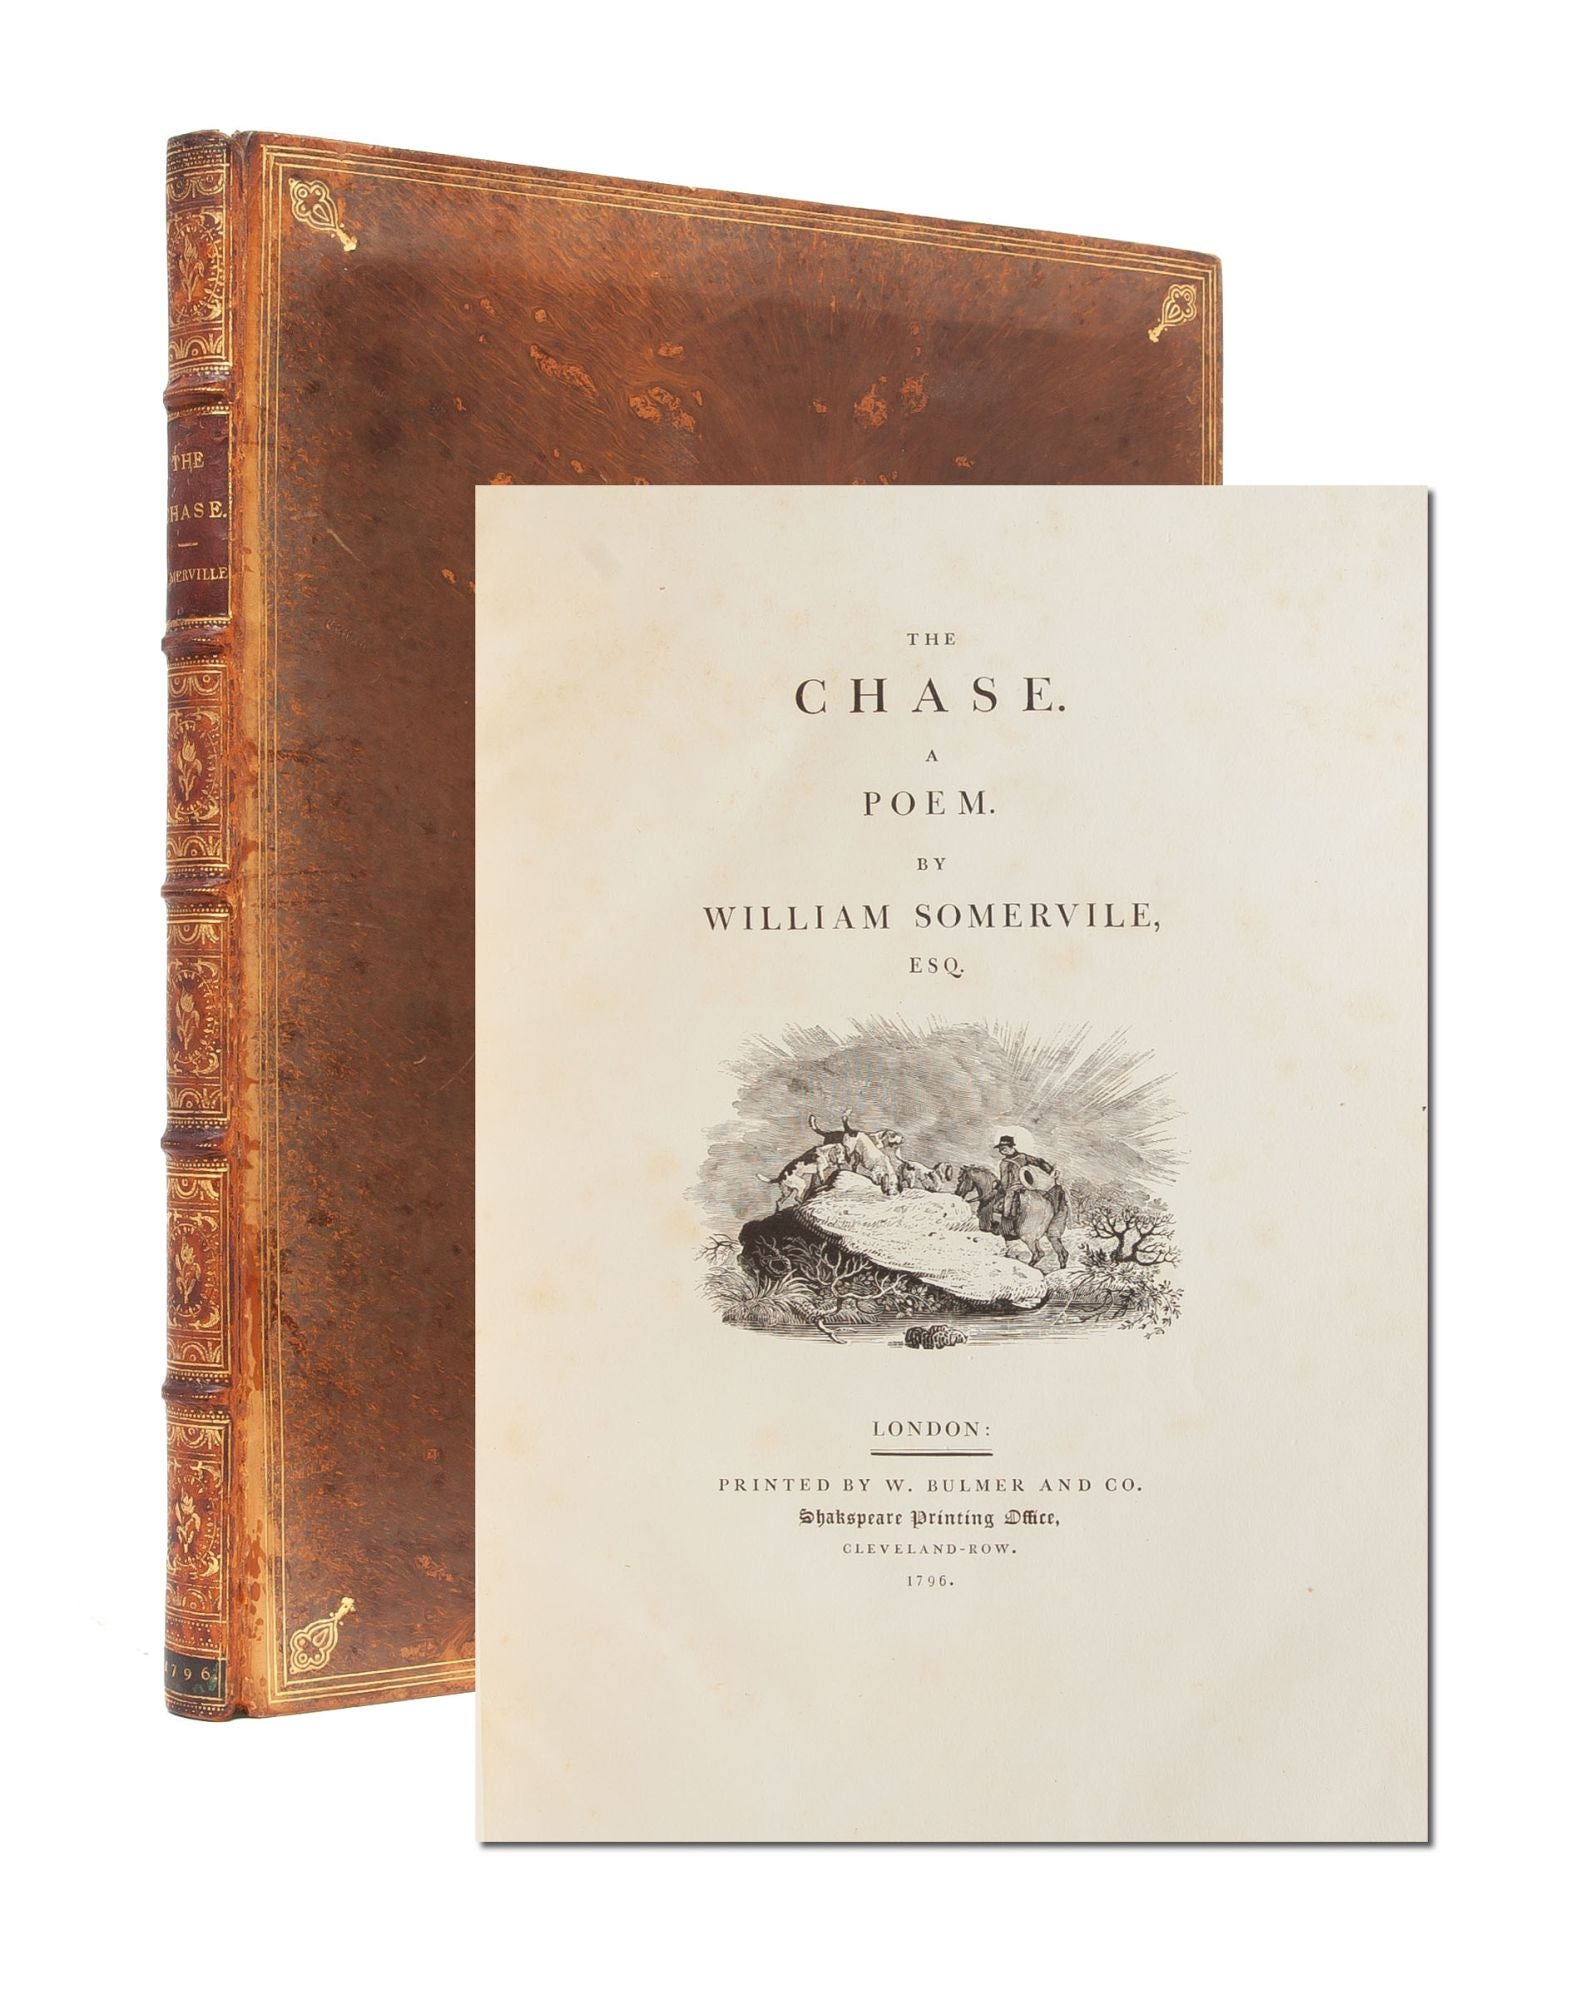 (Item #5141) The Chase. A Poem. William Somerville.